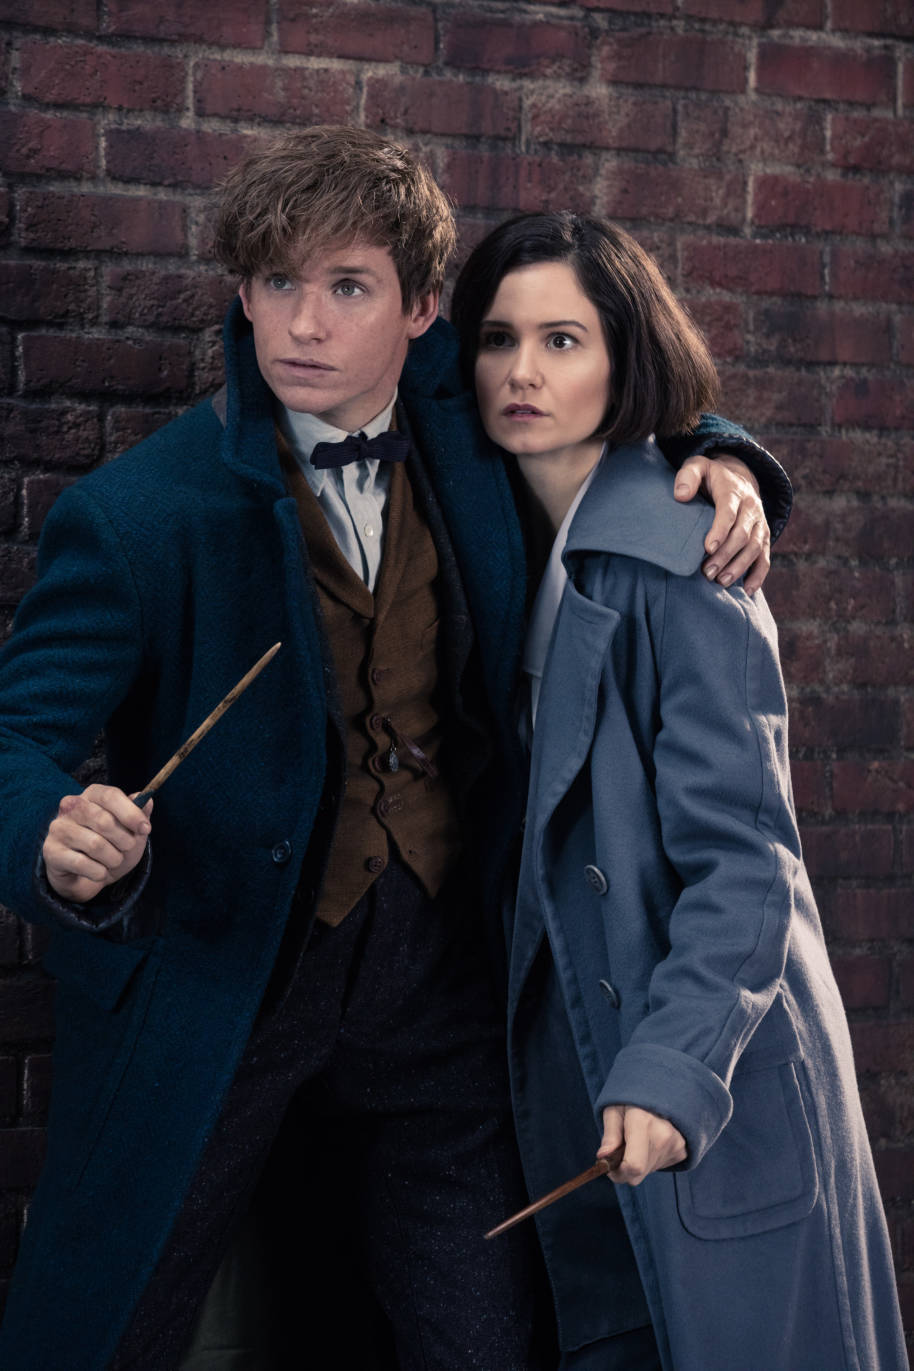 Newt Scamander puts his arm around Tina Goldstein as they shelter anxiously with their wands at the ready